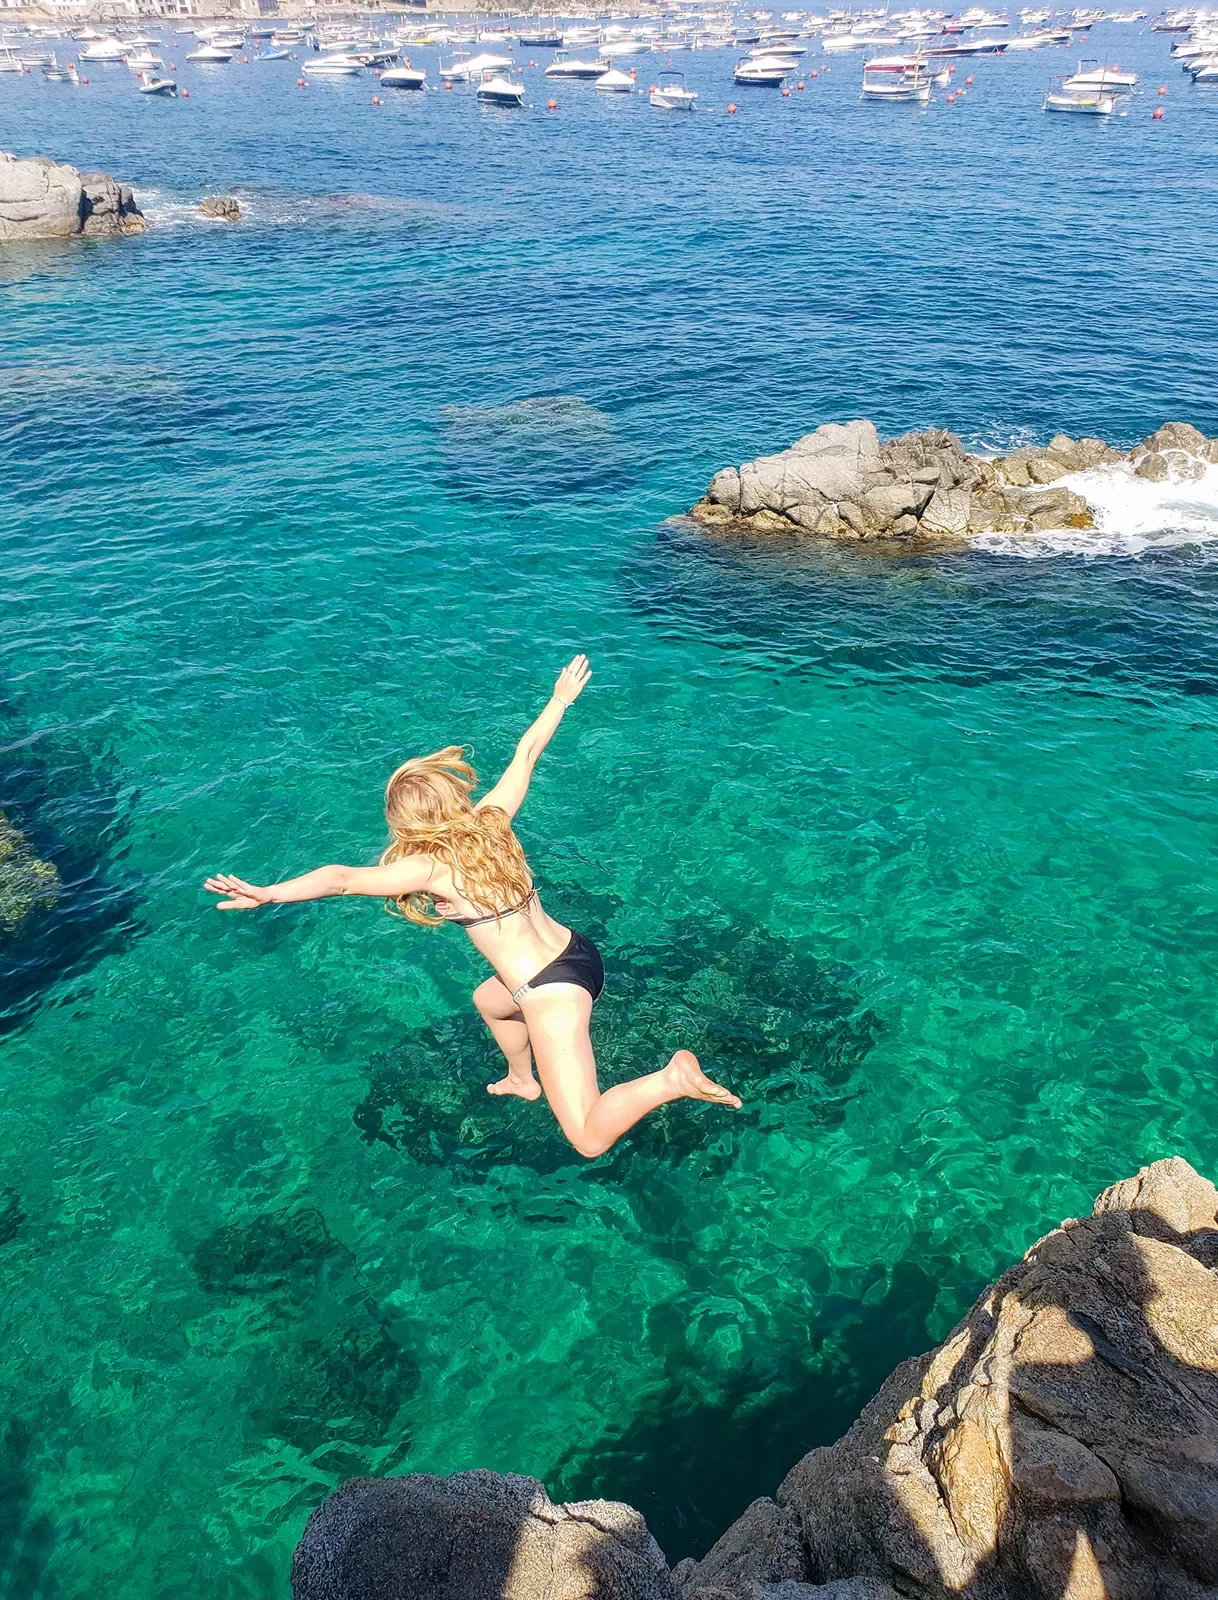 Teenage girl jumping into clear blue-green waters